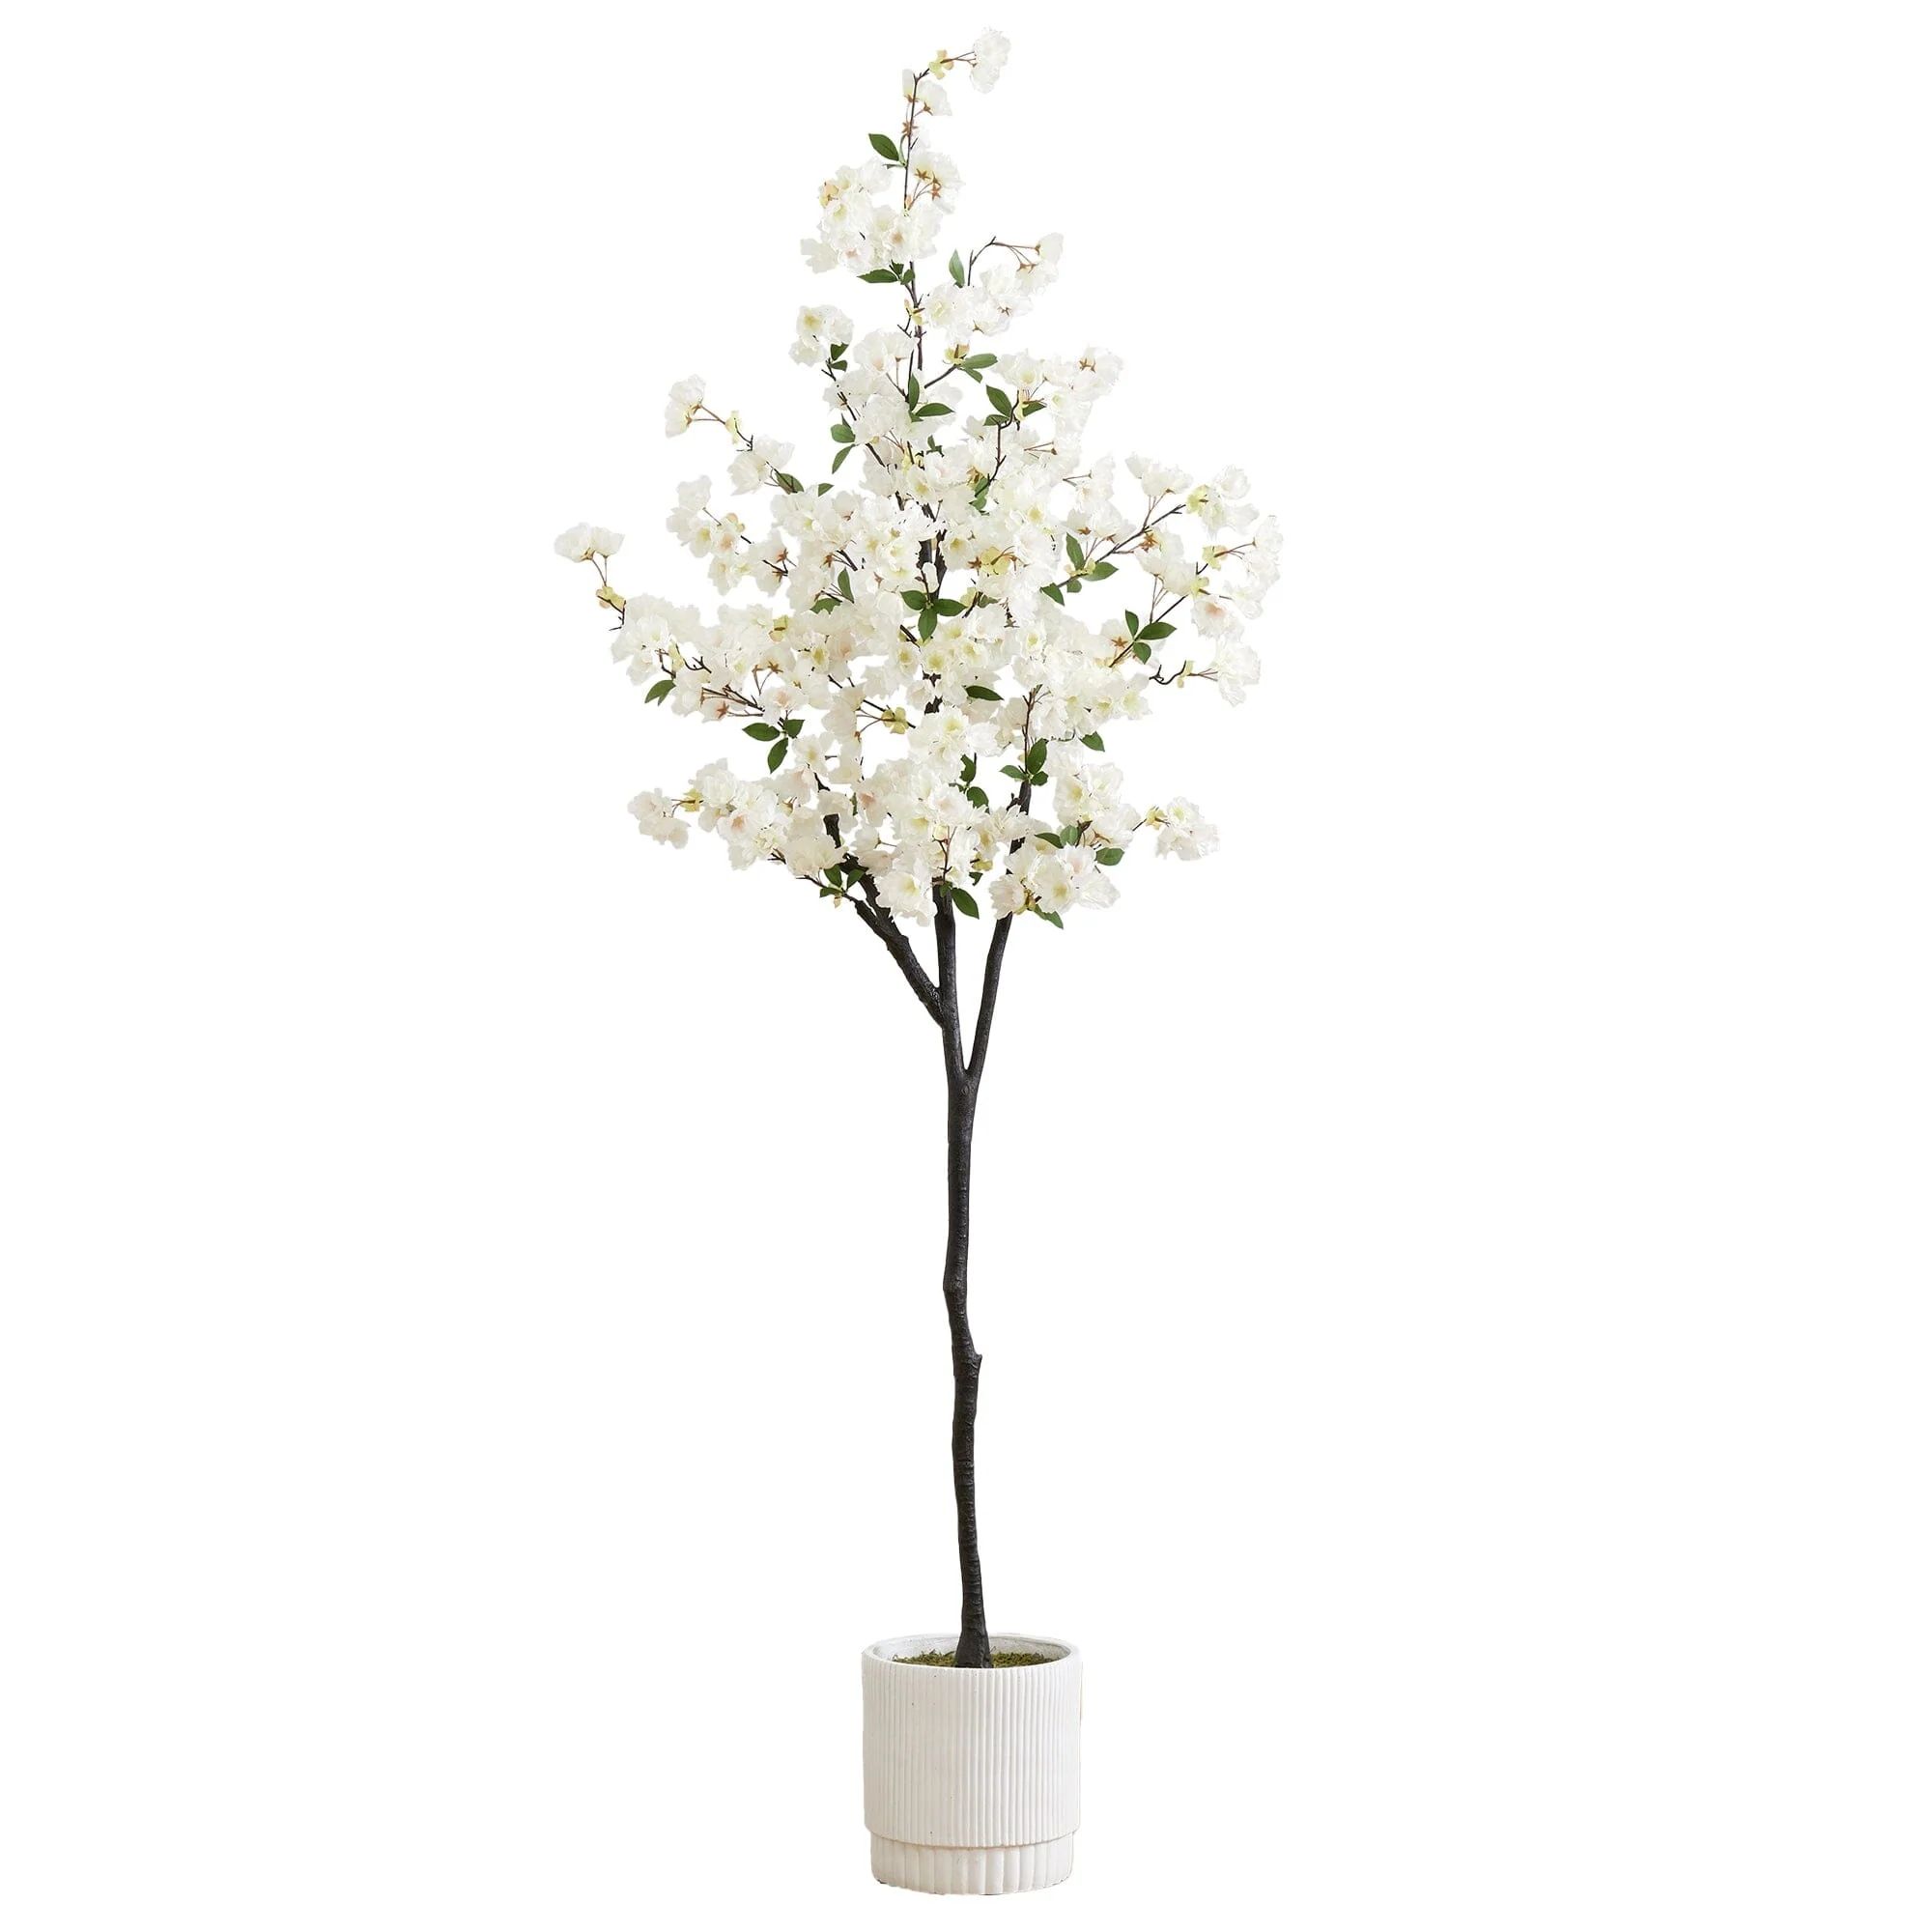 6’ Artificial Cherry Blossom Tree with White Decorative Planter | Nearly Natural | Nearly Natural